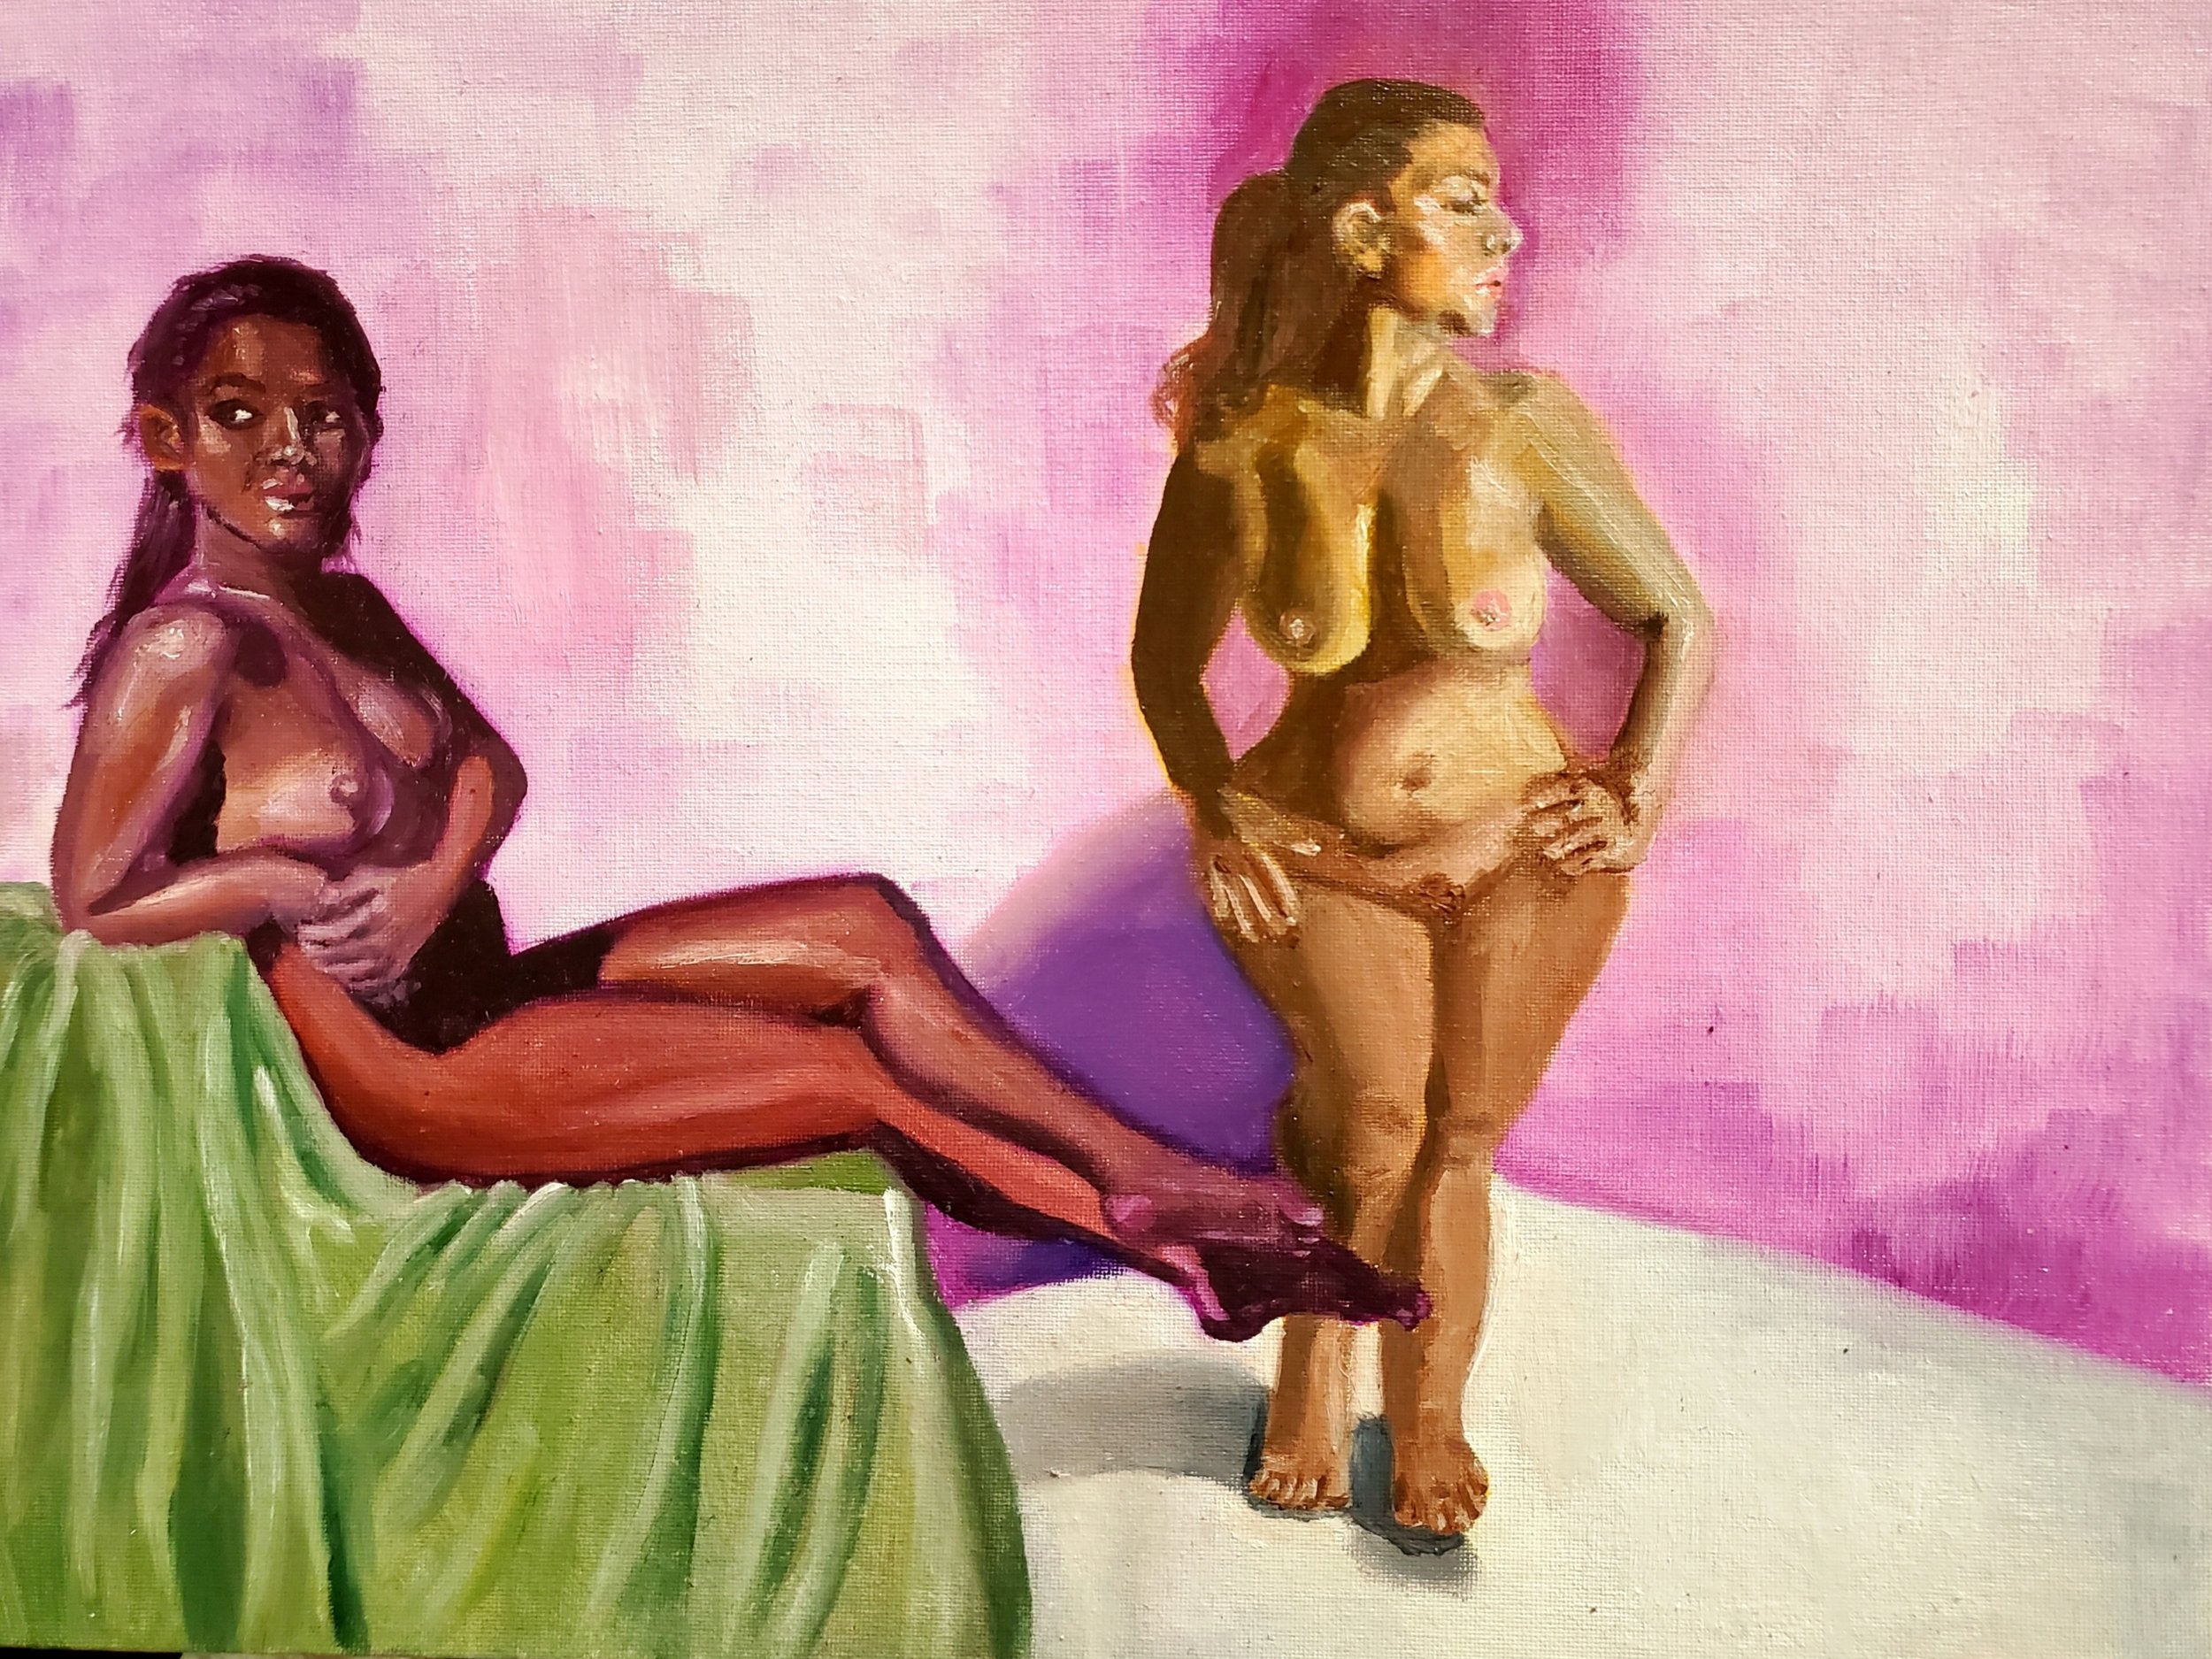 Painting of two naked women. One sits on a chair draped in green fabric, while the other stands, hands on her hips, looking to the right